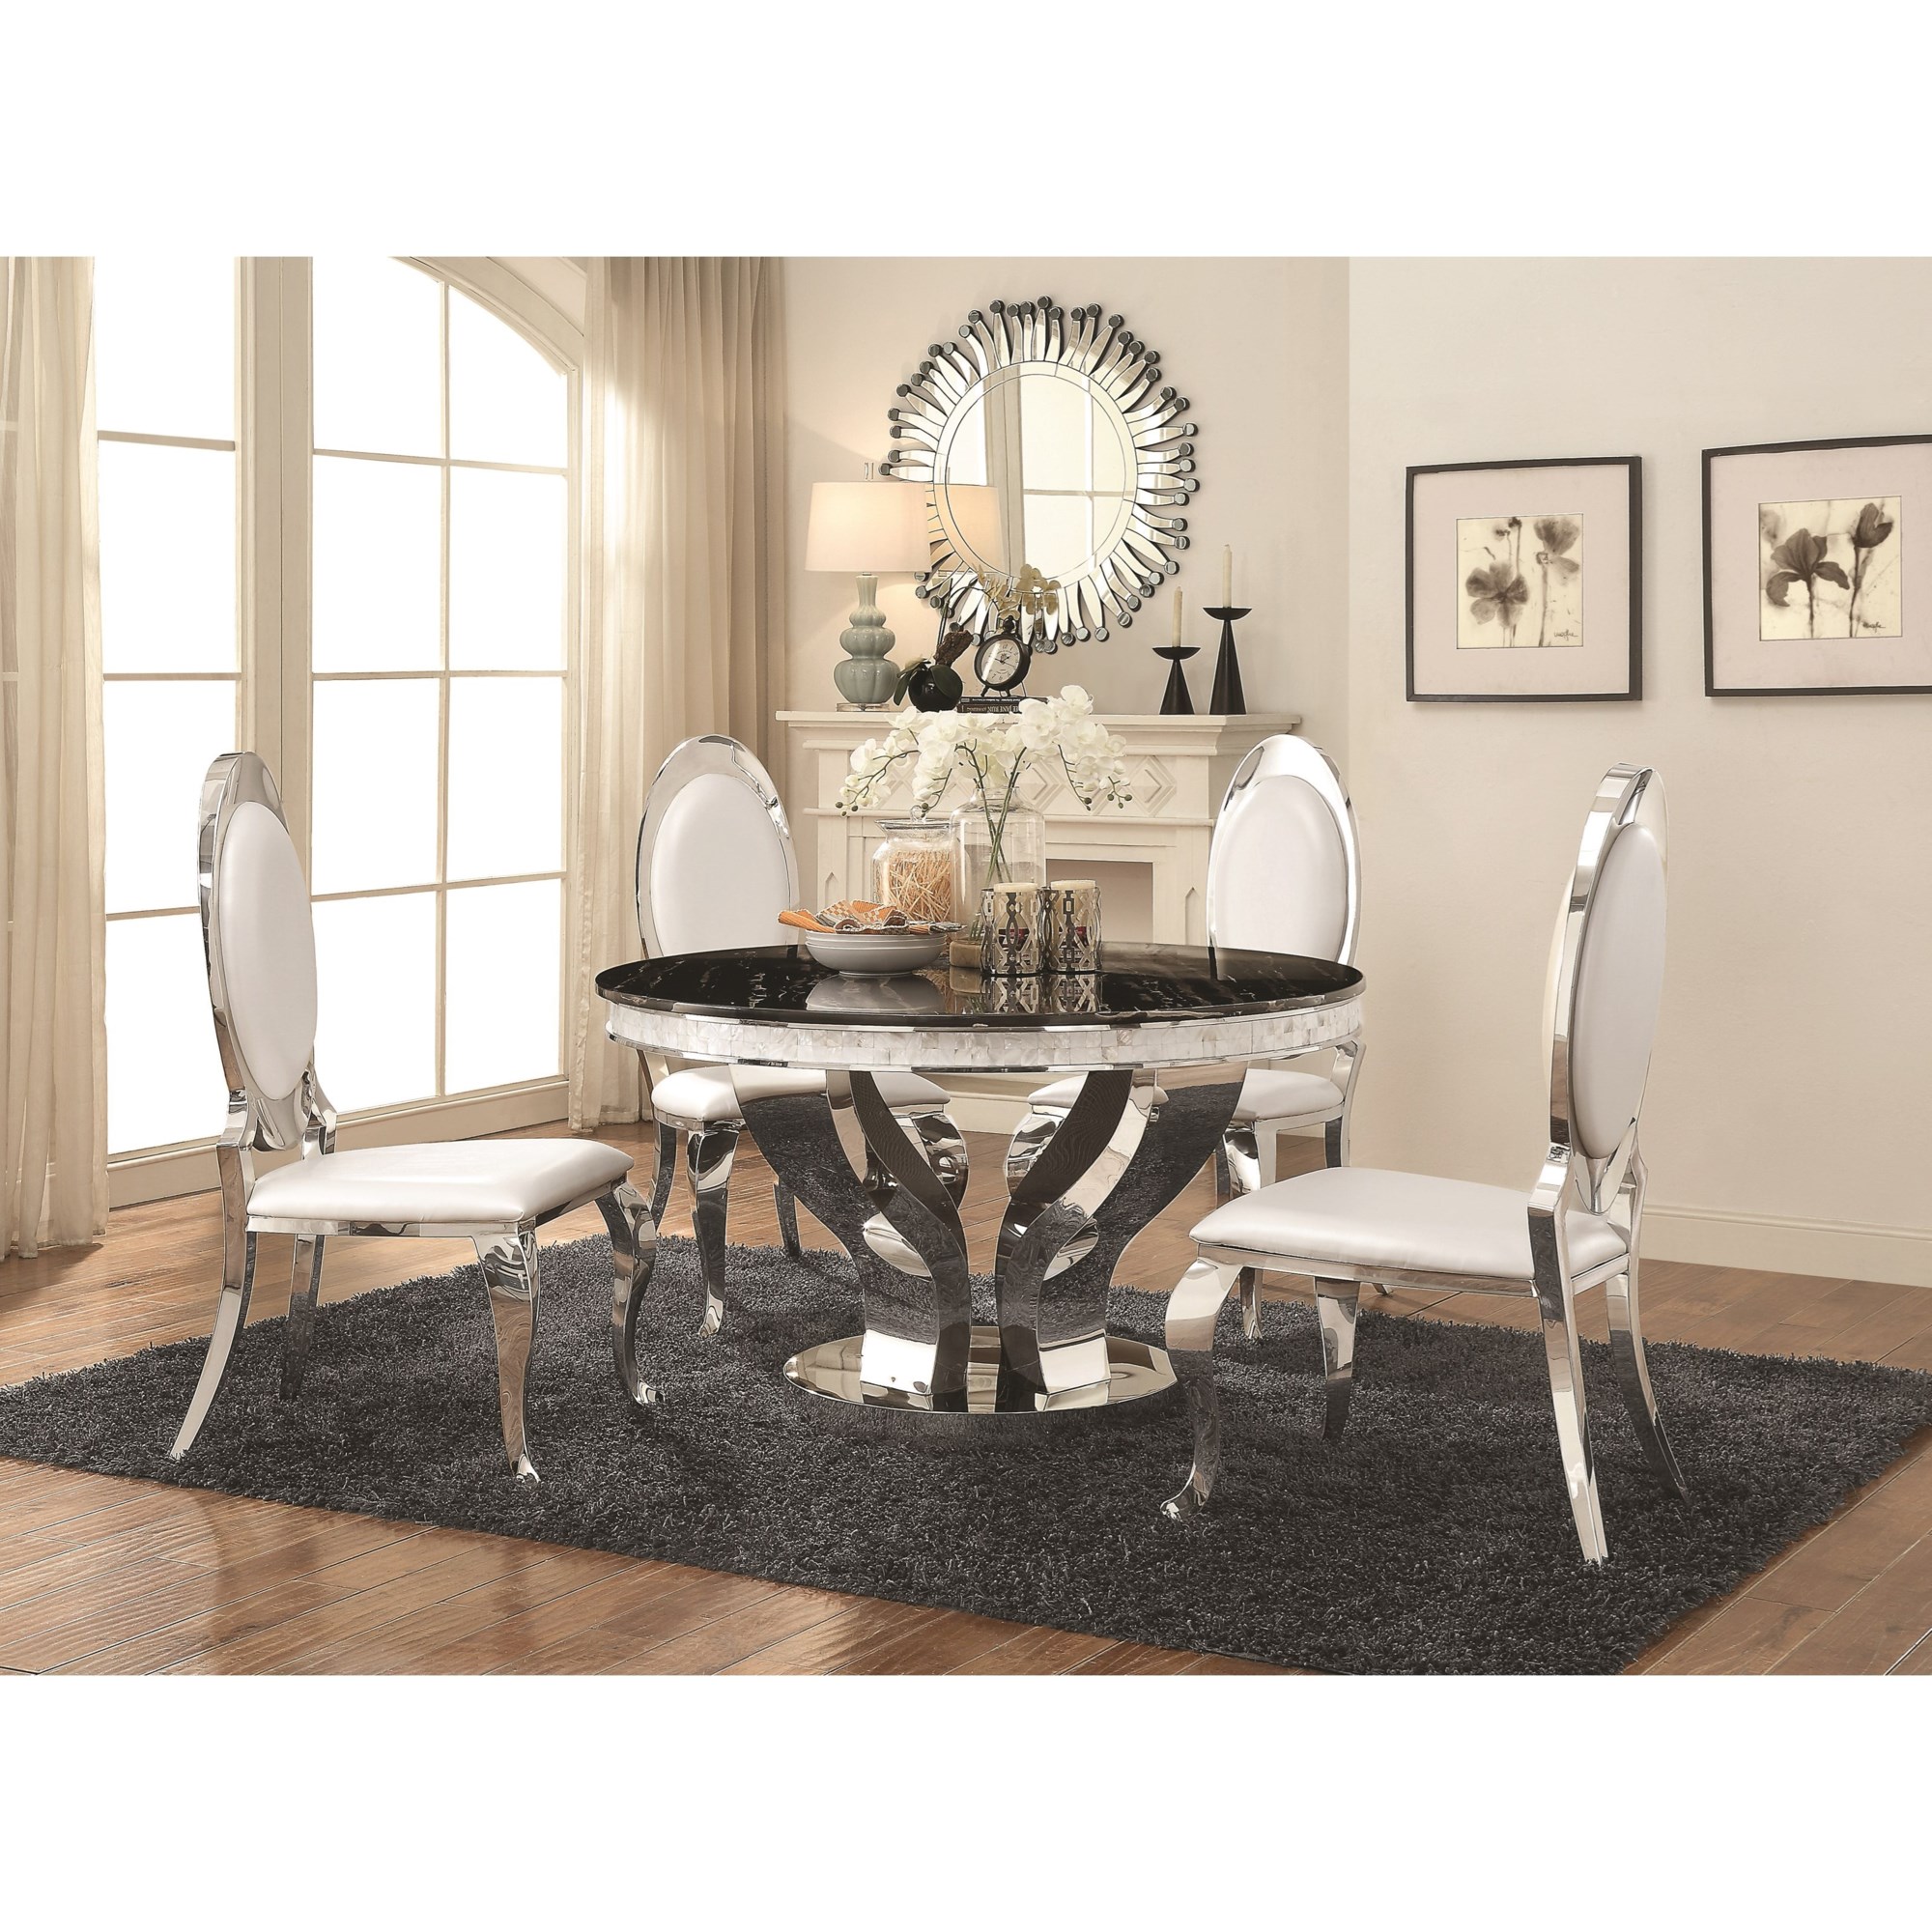 Coaster Modern Dining 102310 White Dining Table with Chrome Metal